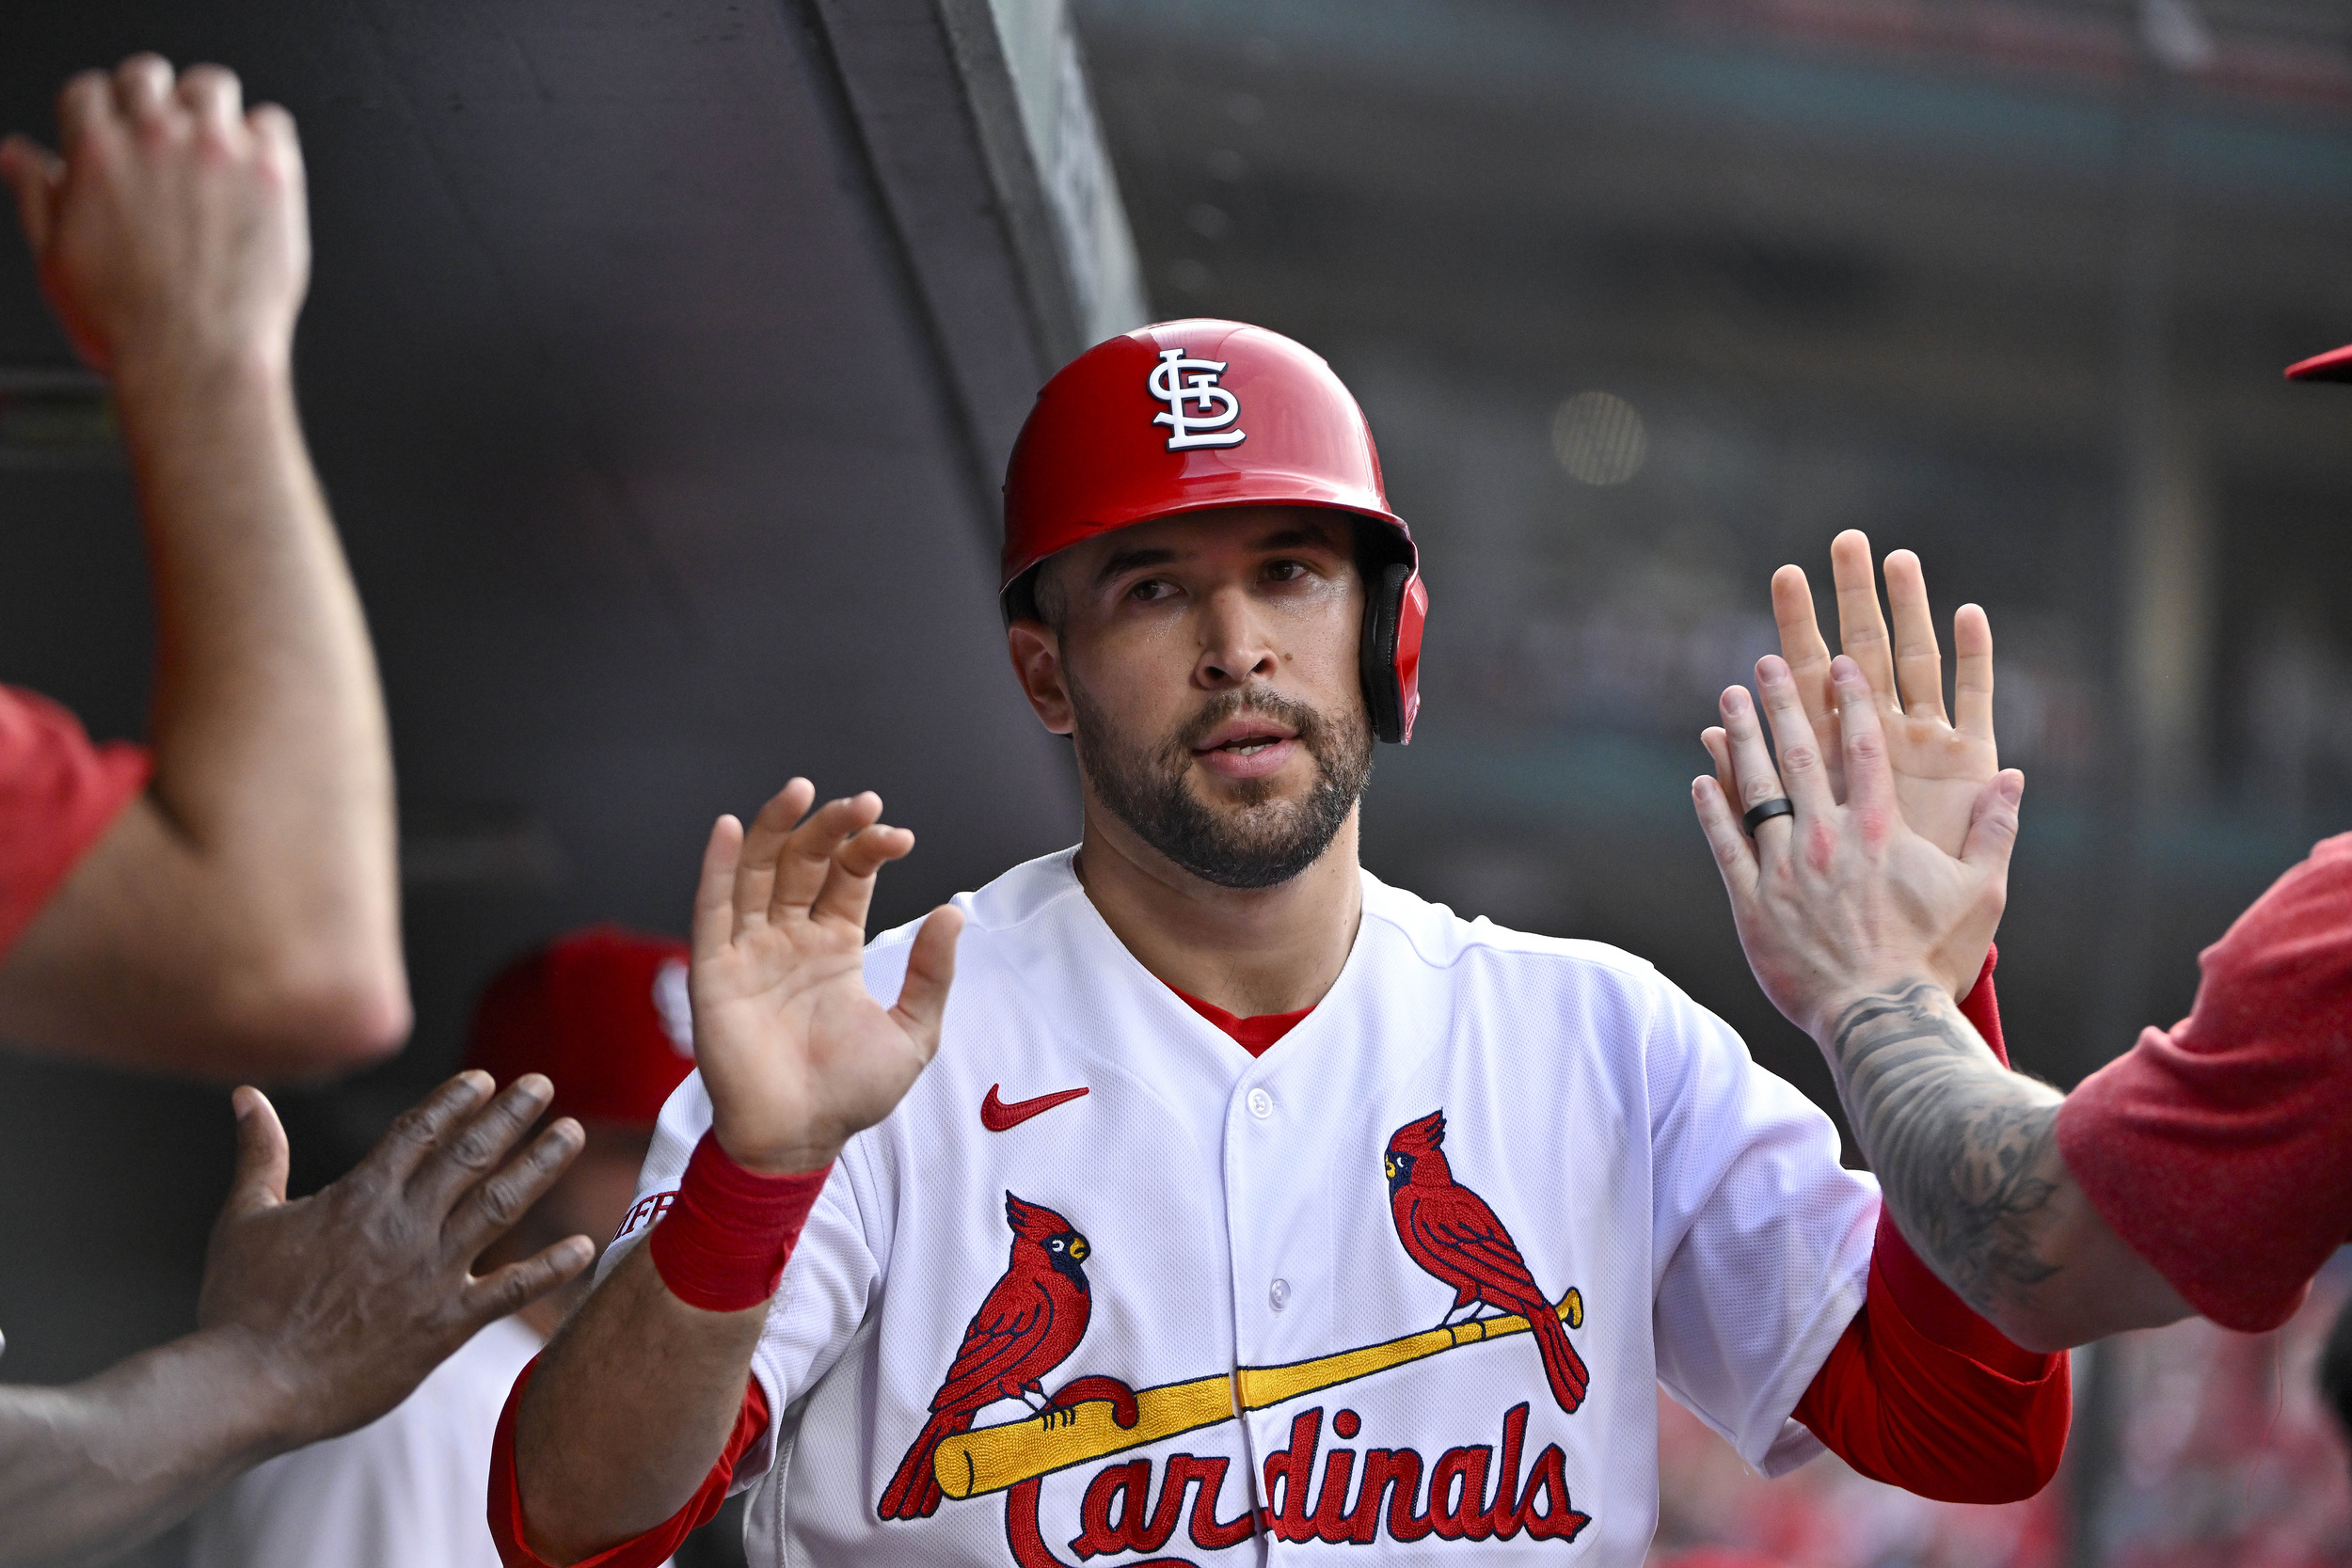 cardinals to receive needed outfield help off injured list